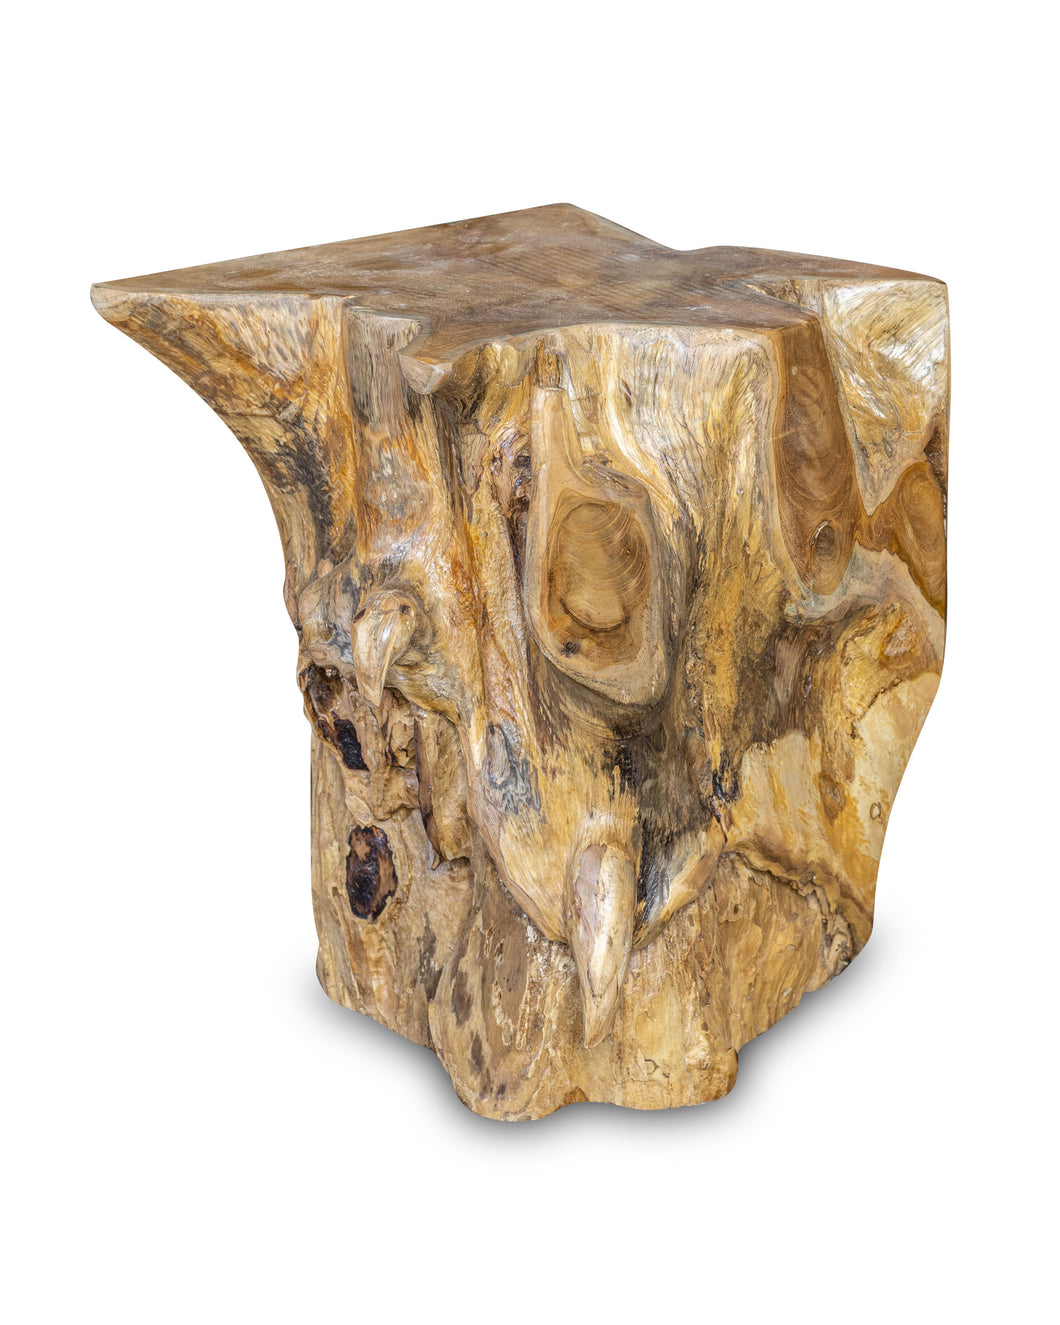 Square Solid Teak Wood Side Table, Natural Tree Stump Stool or End Table #15 16